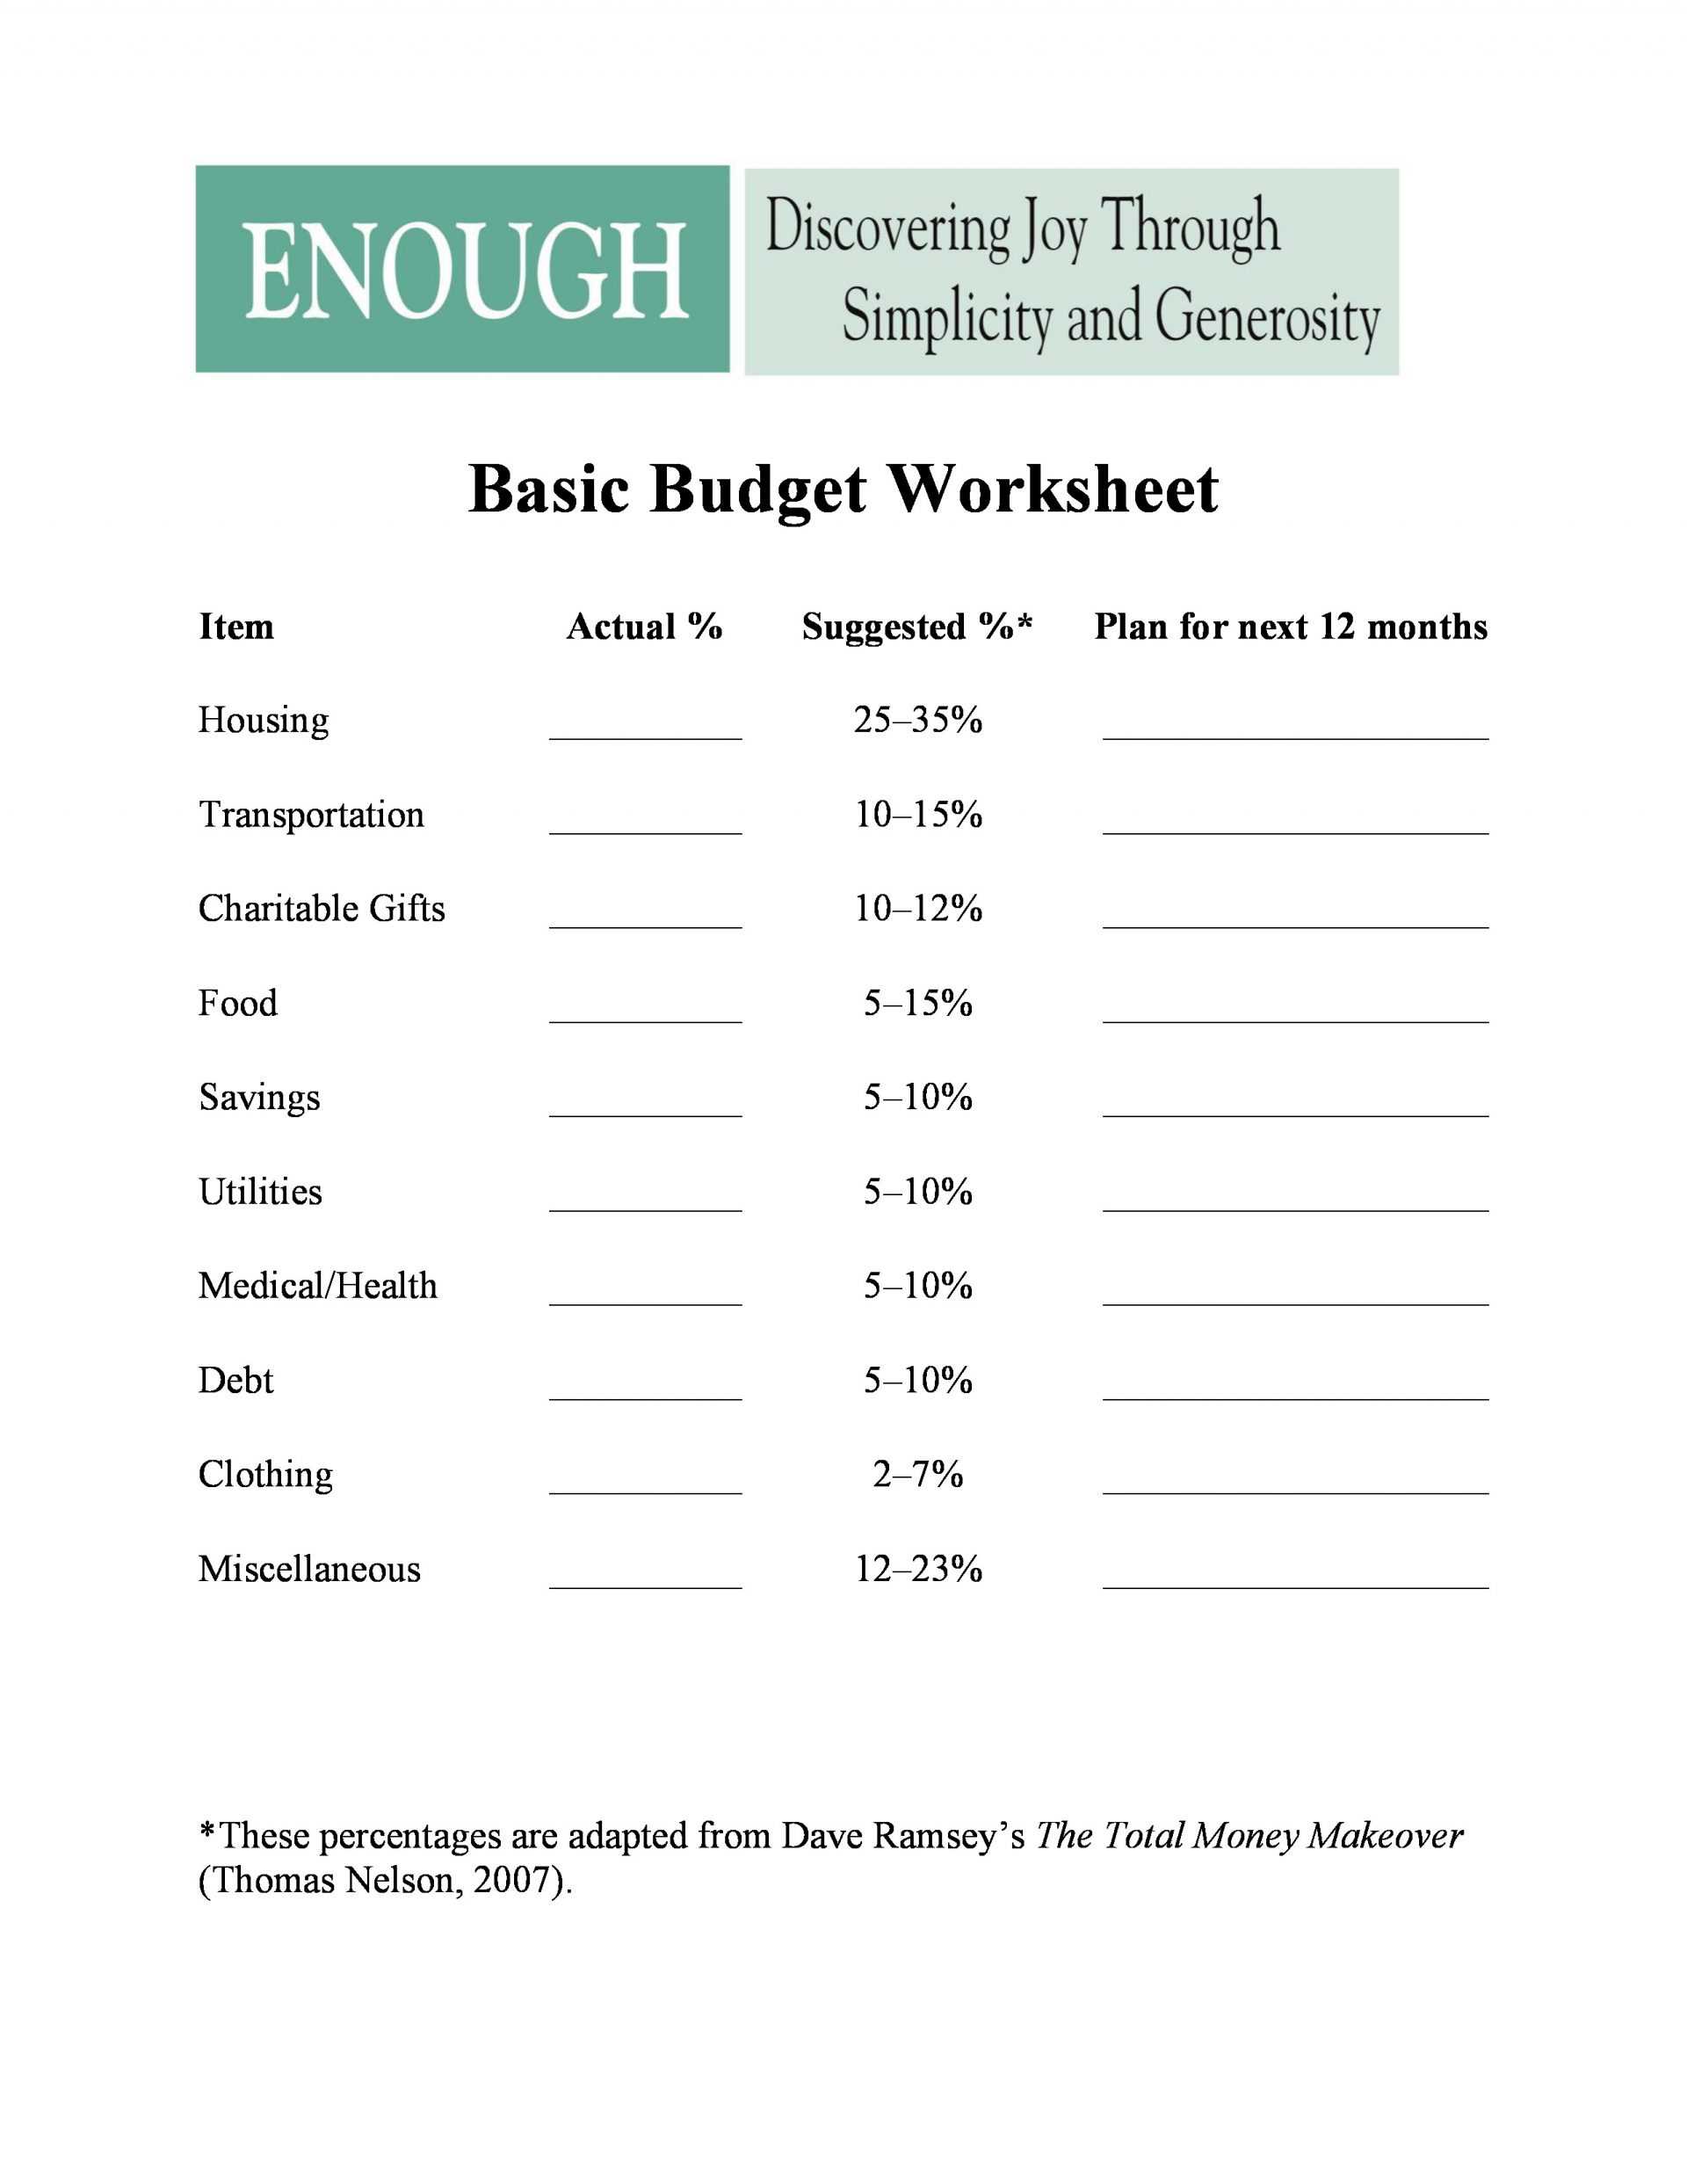 Home Budget Worksheet Pdf Along with Easy Bud Worksheet High Worksheets Tire Driveeasy Co